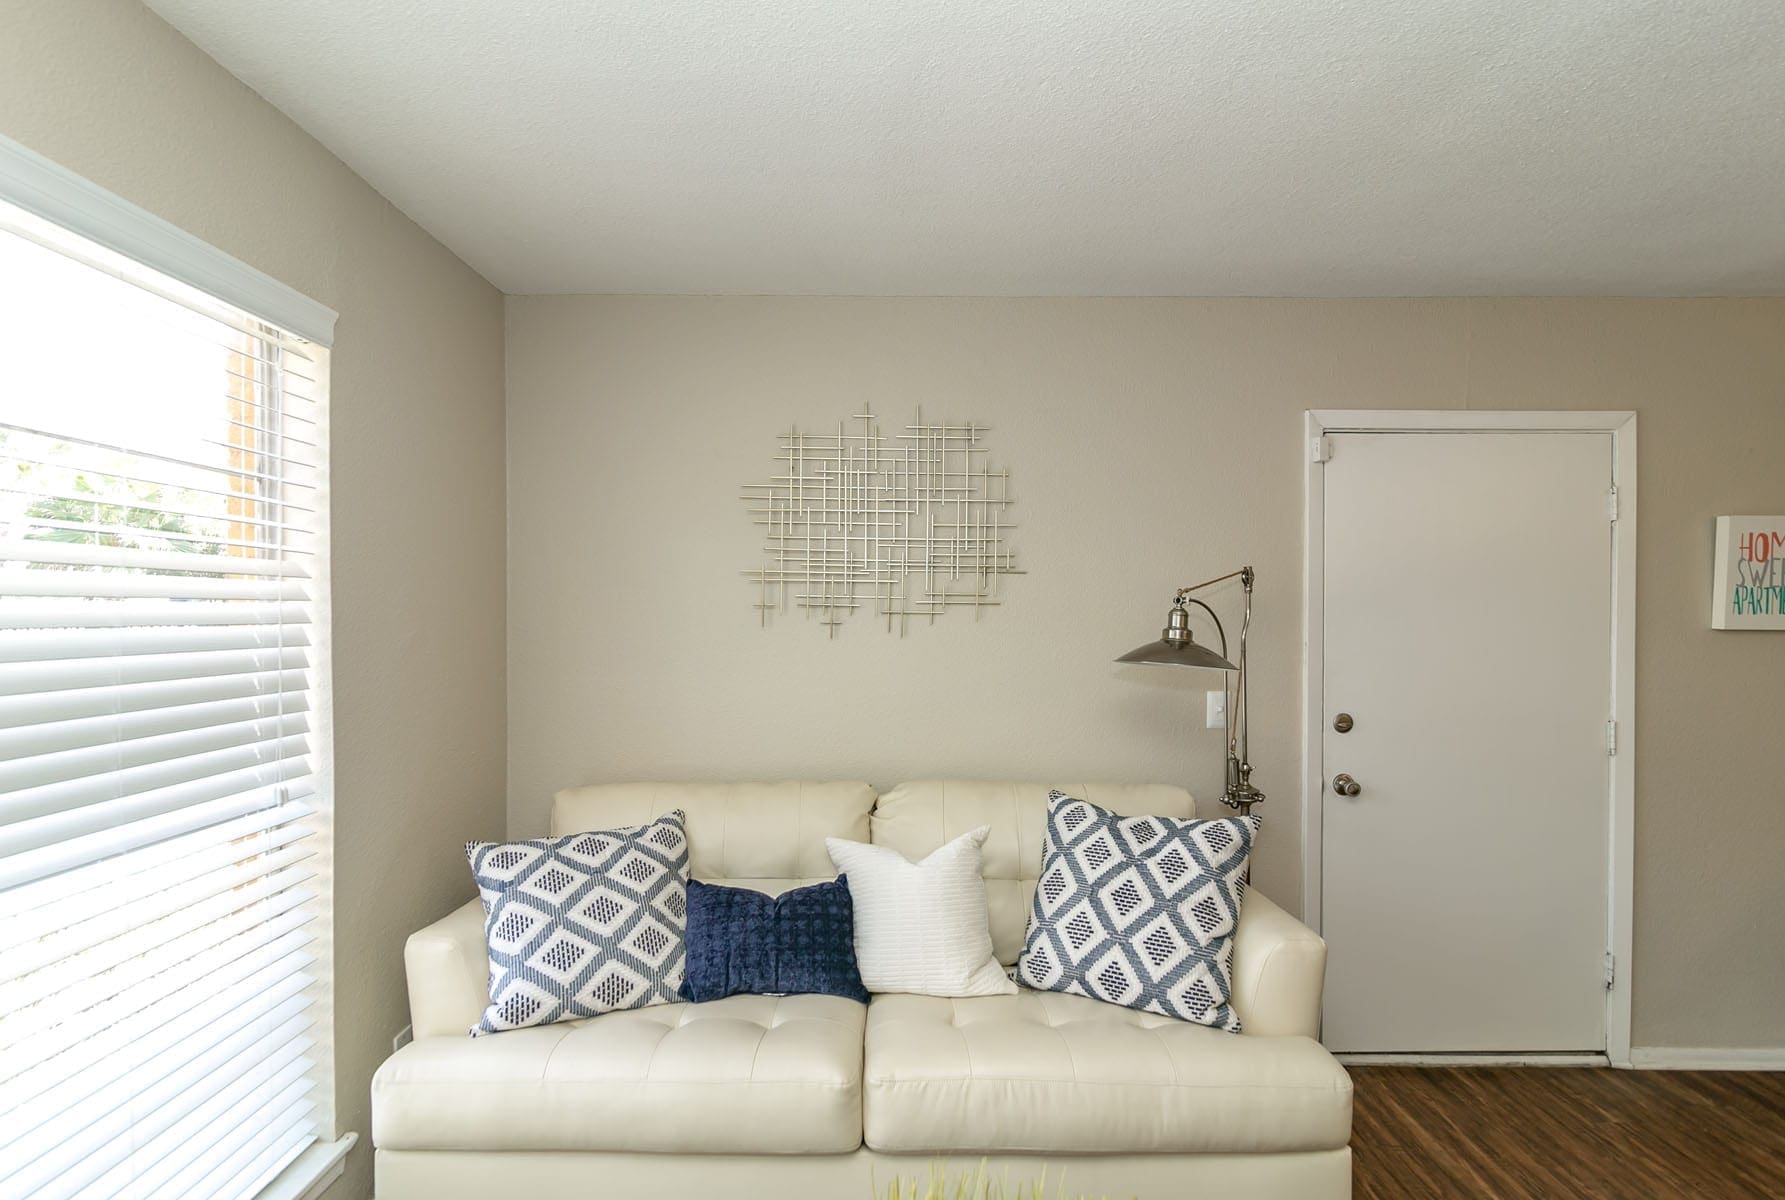 Whit couch with blue, grey and white pillows. Windoe to the left and a door to the right. A white wall in the background.